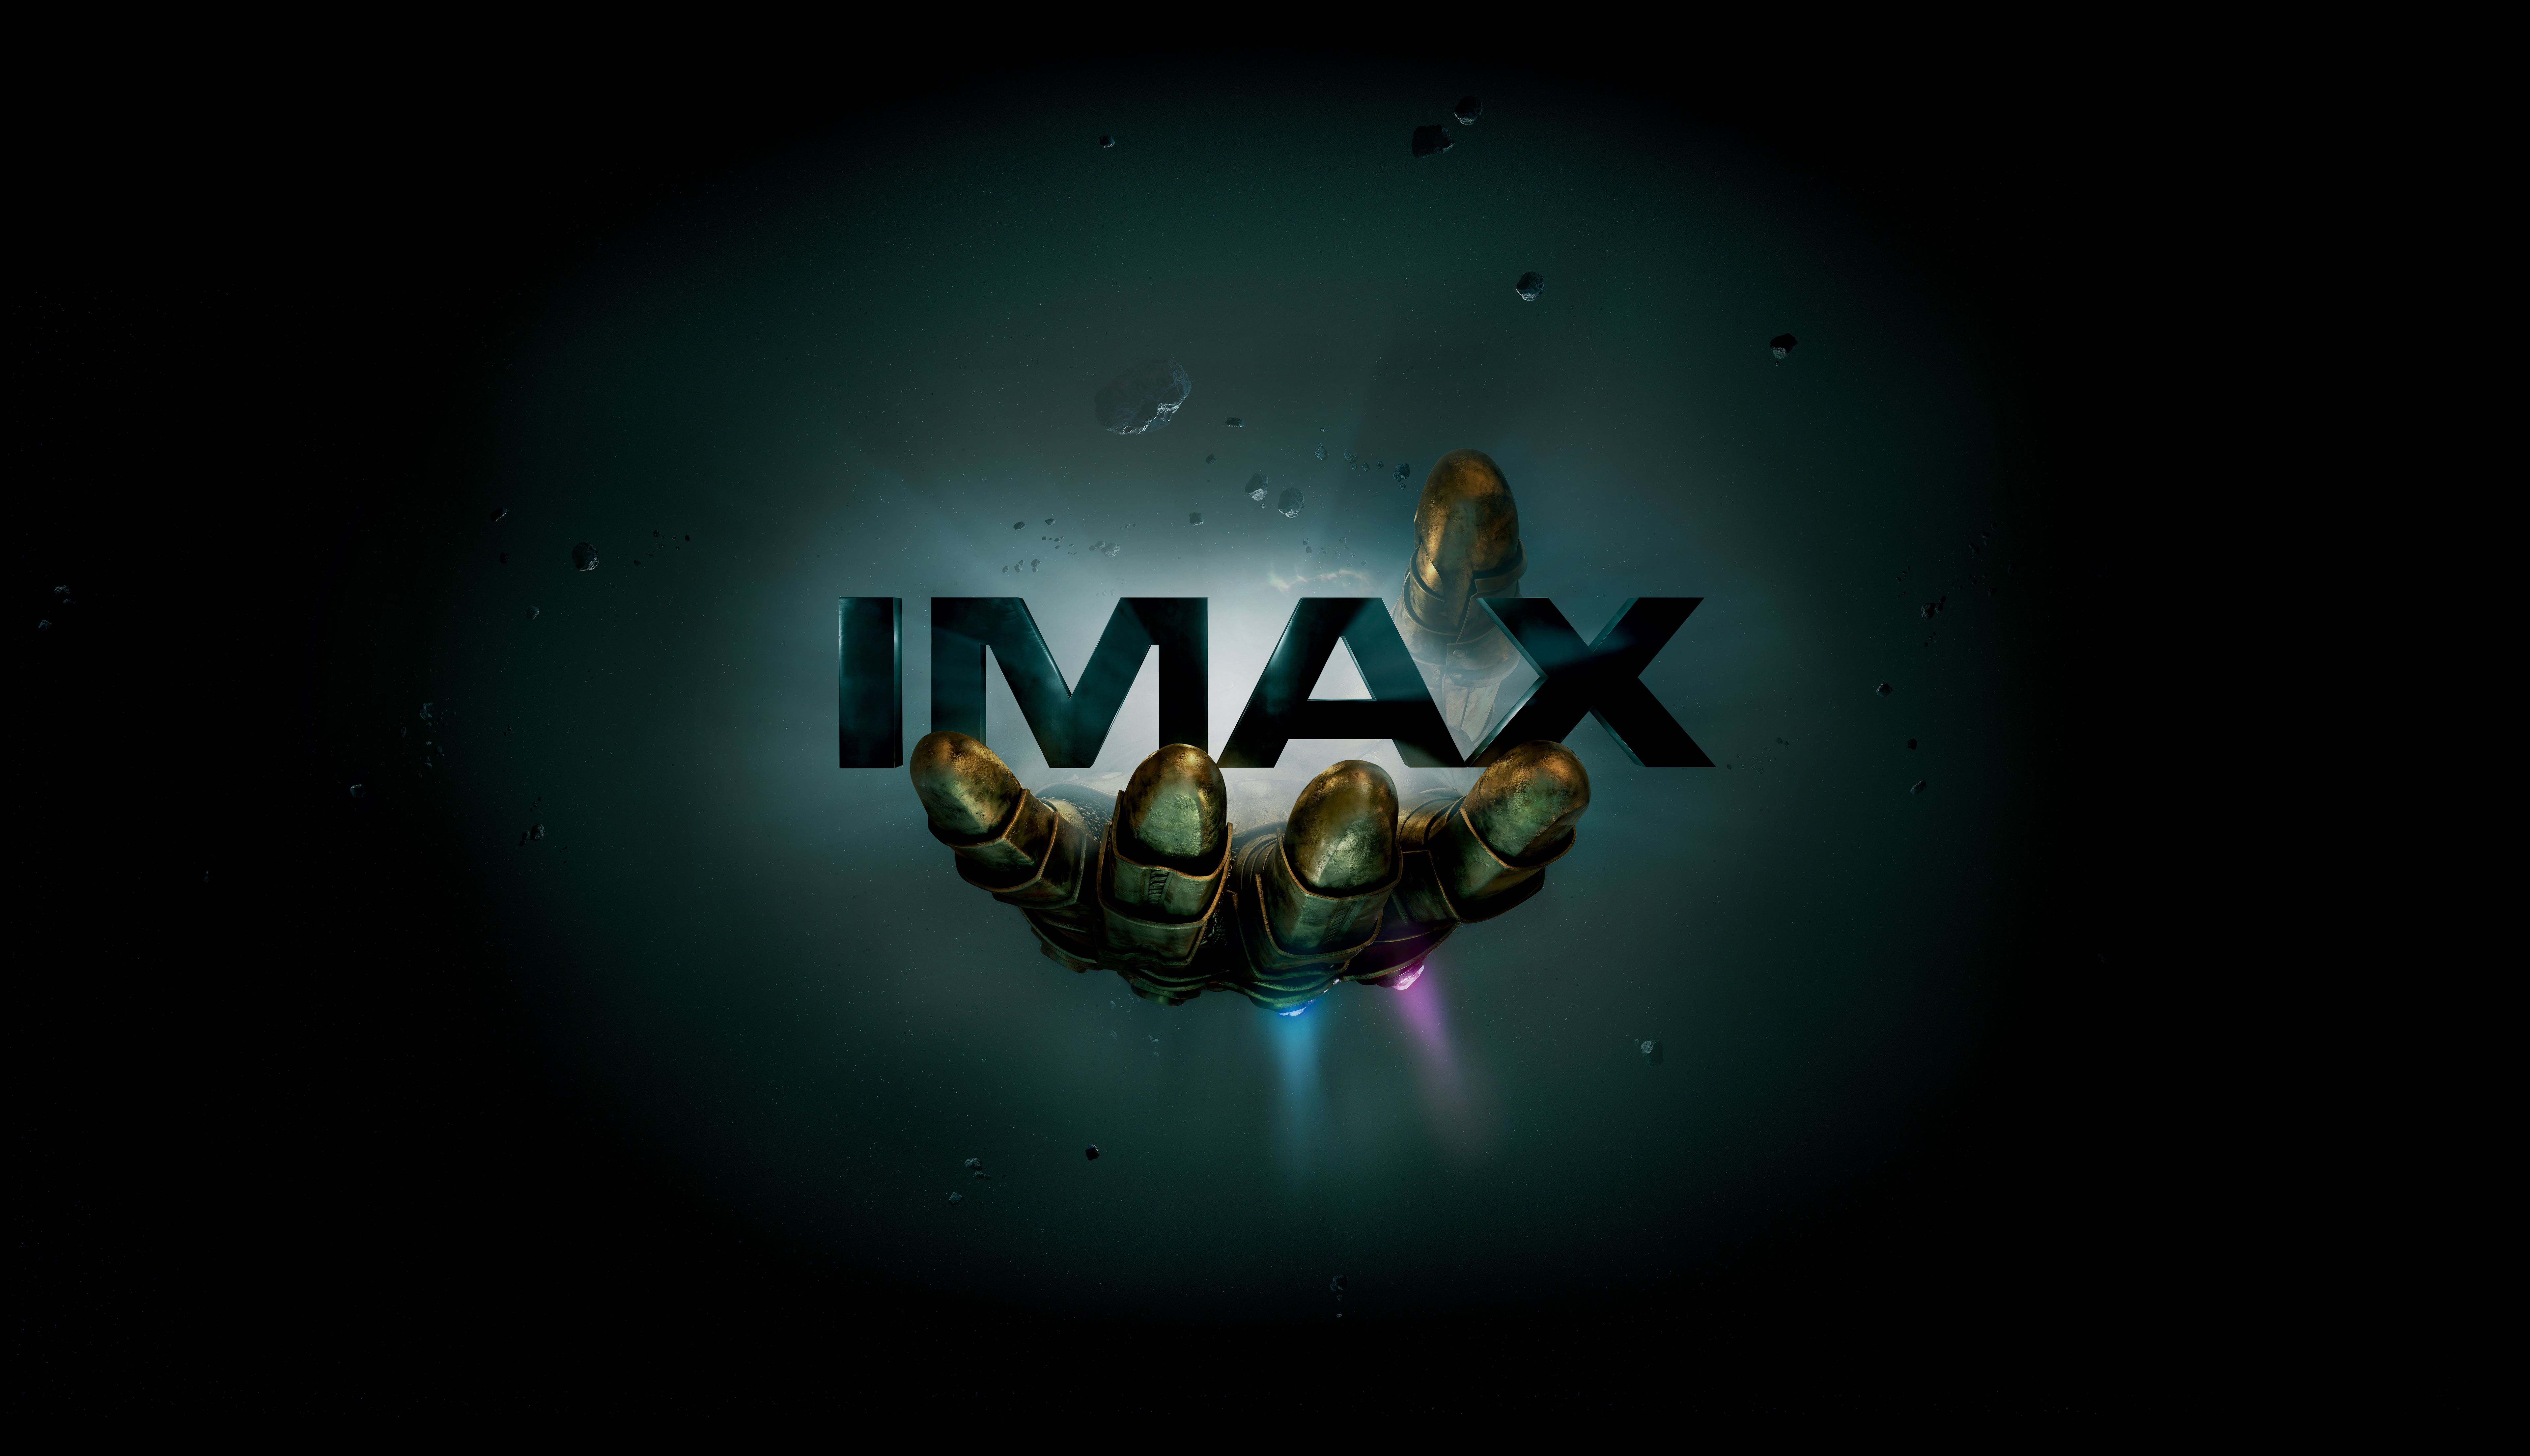 Wallpaper Avengers: Infinity War, Thanos, IMAX, 4K, 8K, Movies / Editor's Picks,. Wallpaper for iPhone, Android, Mobile and Desktop